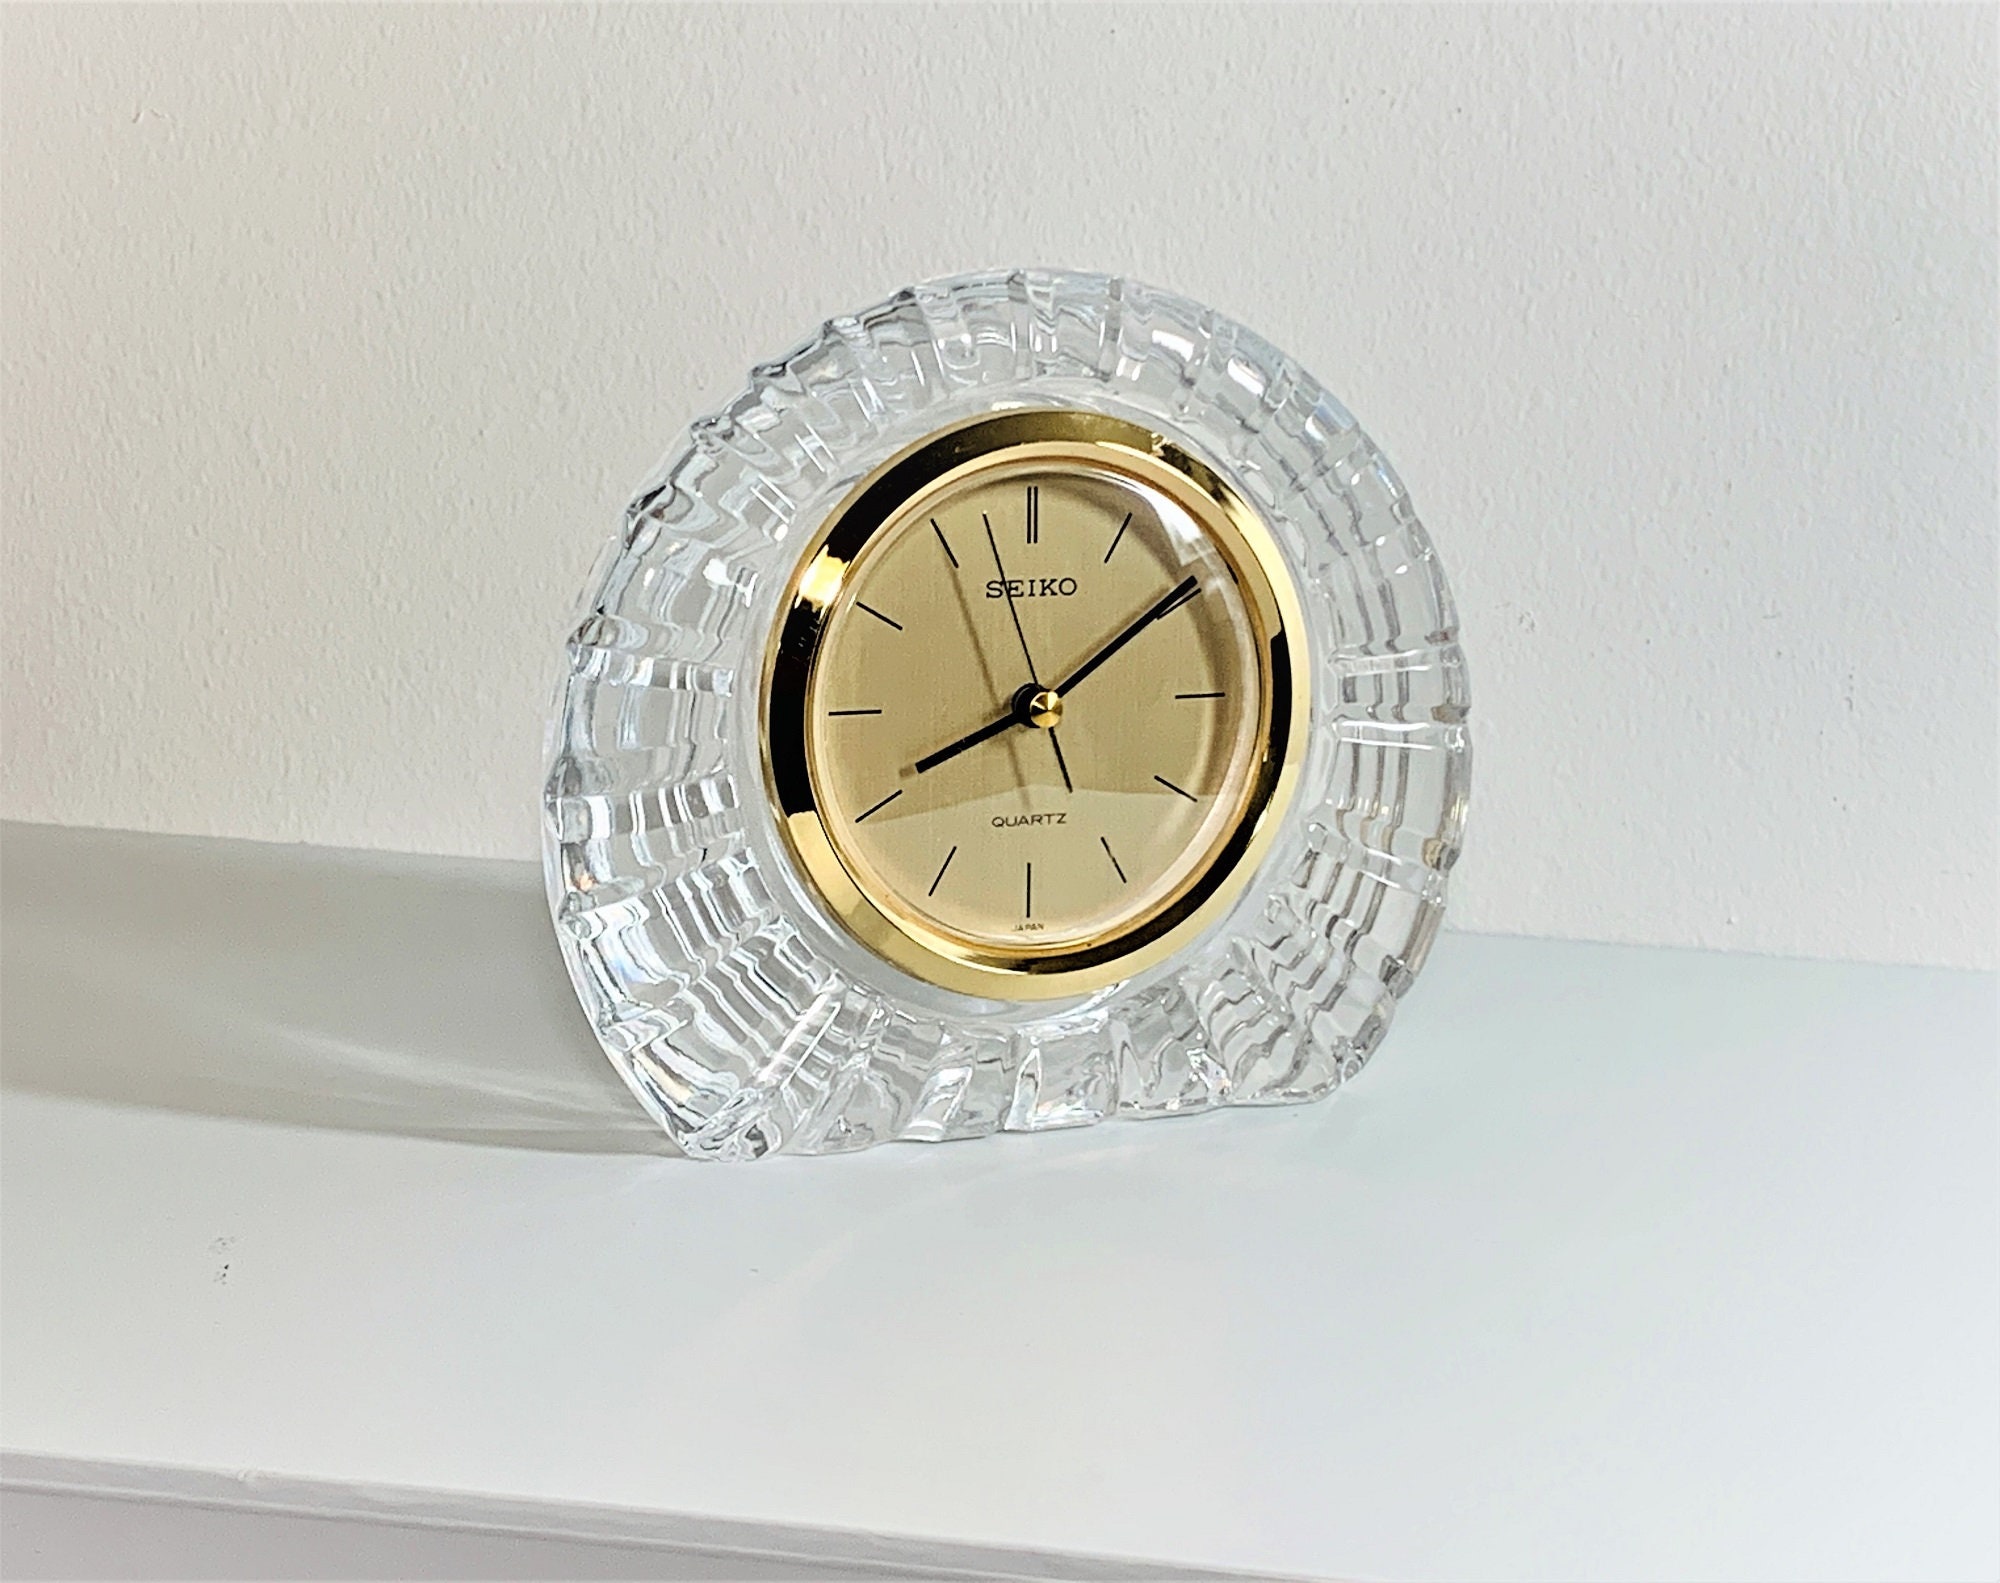 Seiko Fine Crystal Mantel Clock, Japan. Hand Cut 24% Lead Crystal, Serviced  & Works Perfectly, 6 W.  T. Free US Shipping.